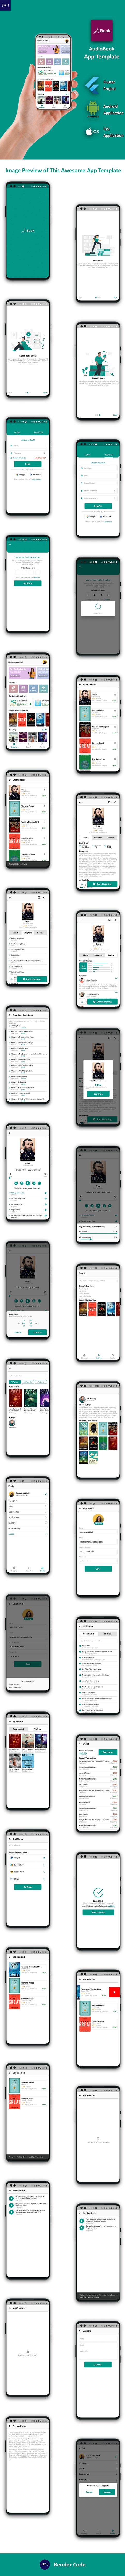 Android Audiobook App Template + iOS Audiobook App Template|  Online Book |  flutter |  Audiobook - 6